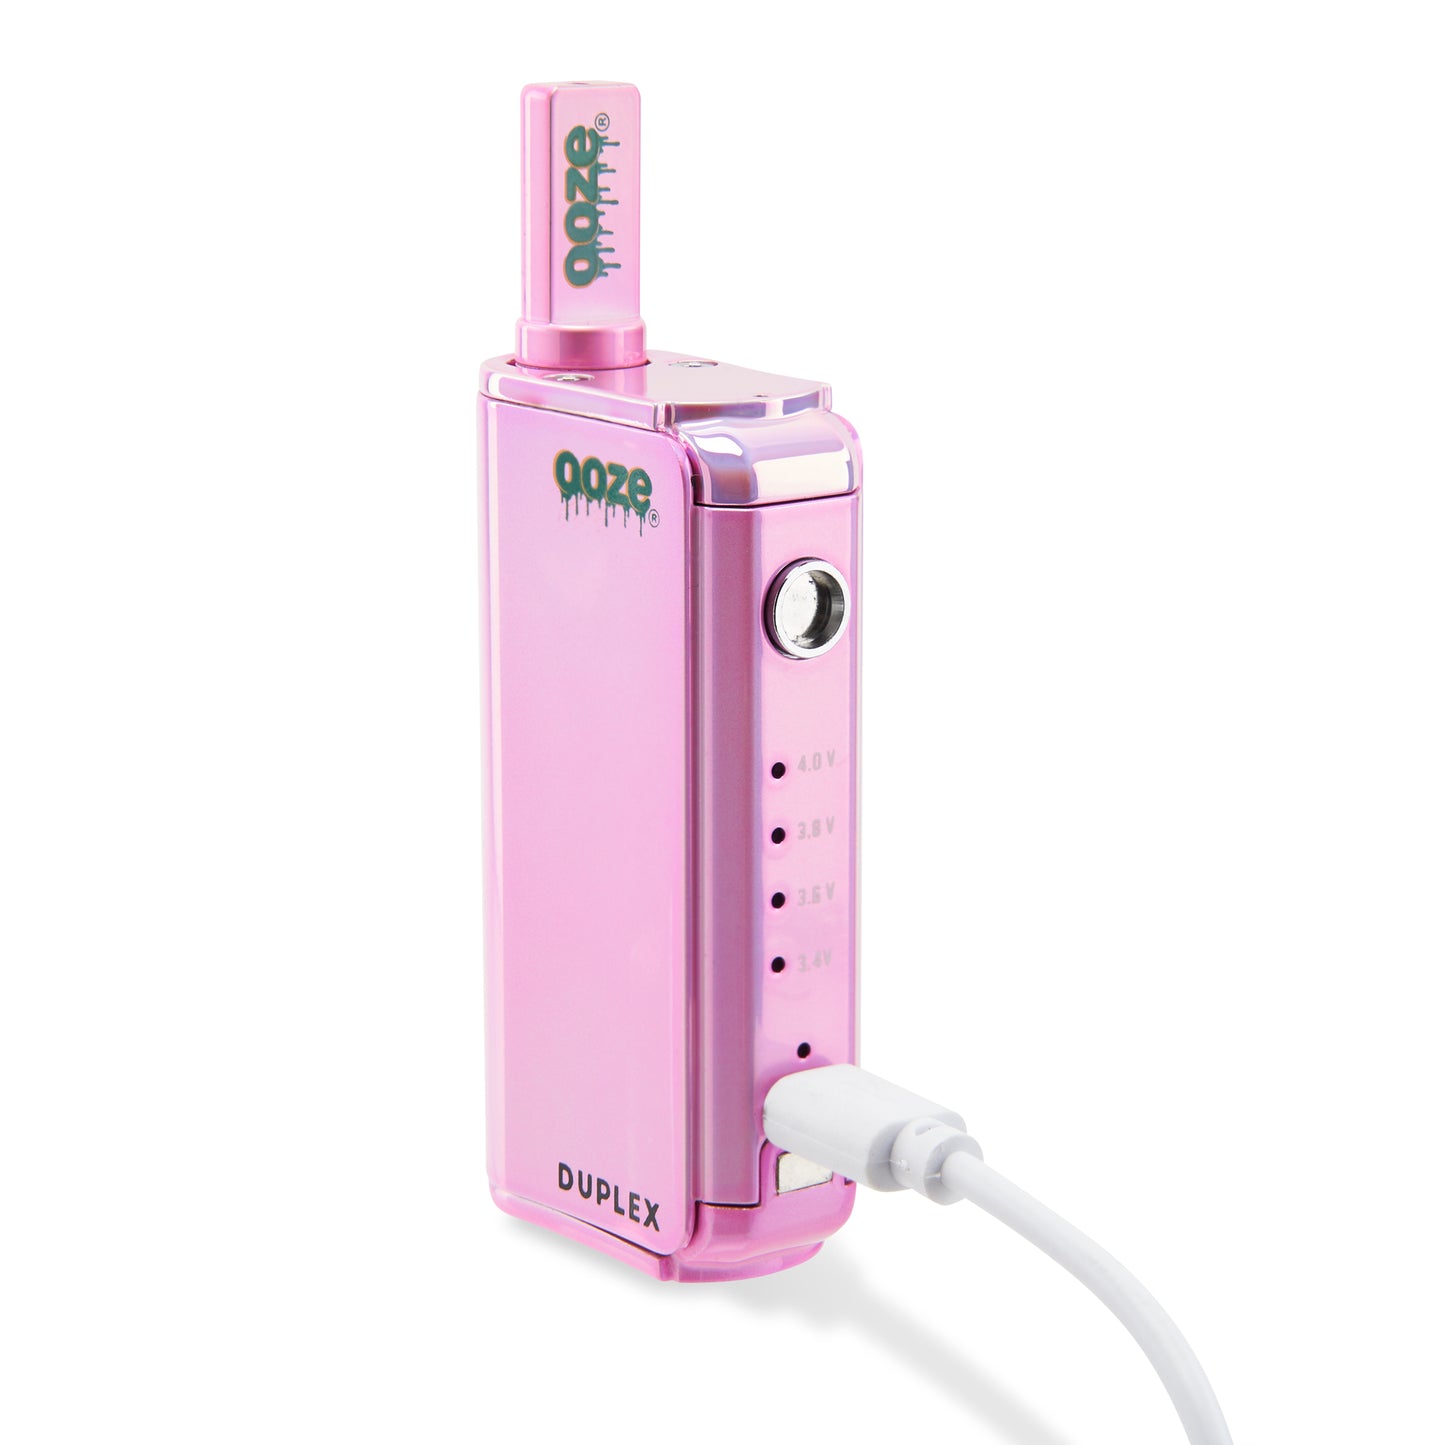 The Ice Pink Ooze Duplex Pro Vaporizer is shown with the magnetic button removed and the type-c charger plugged in.